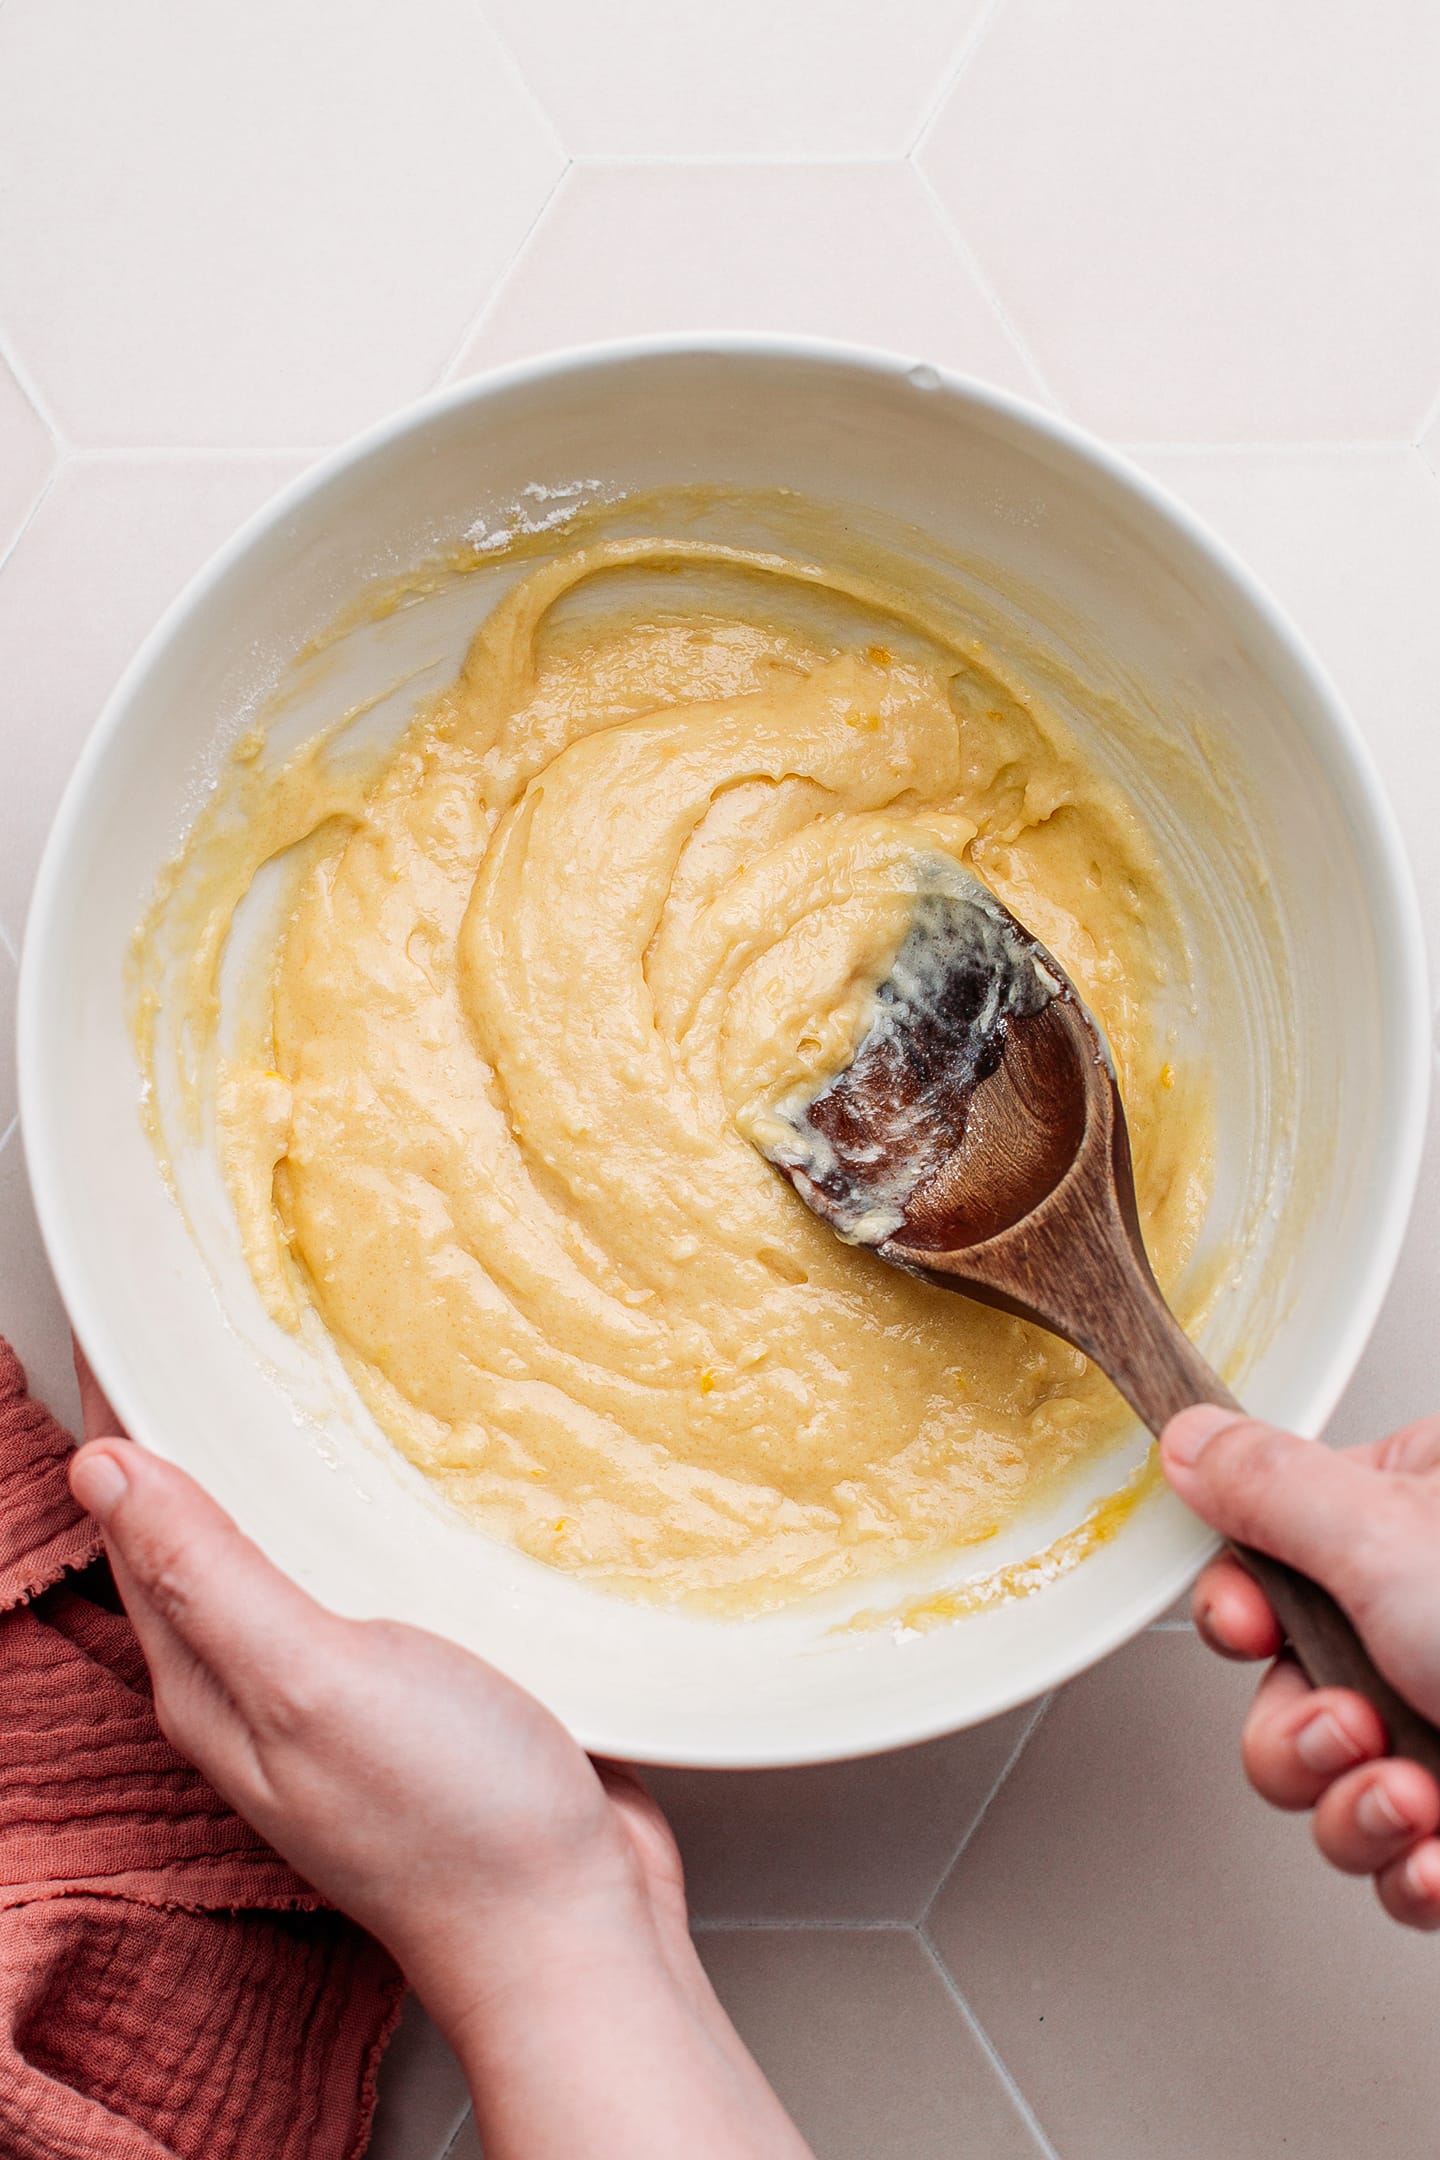 Mixing madeleine batter in a bowl.